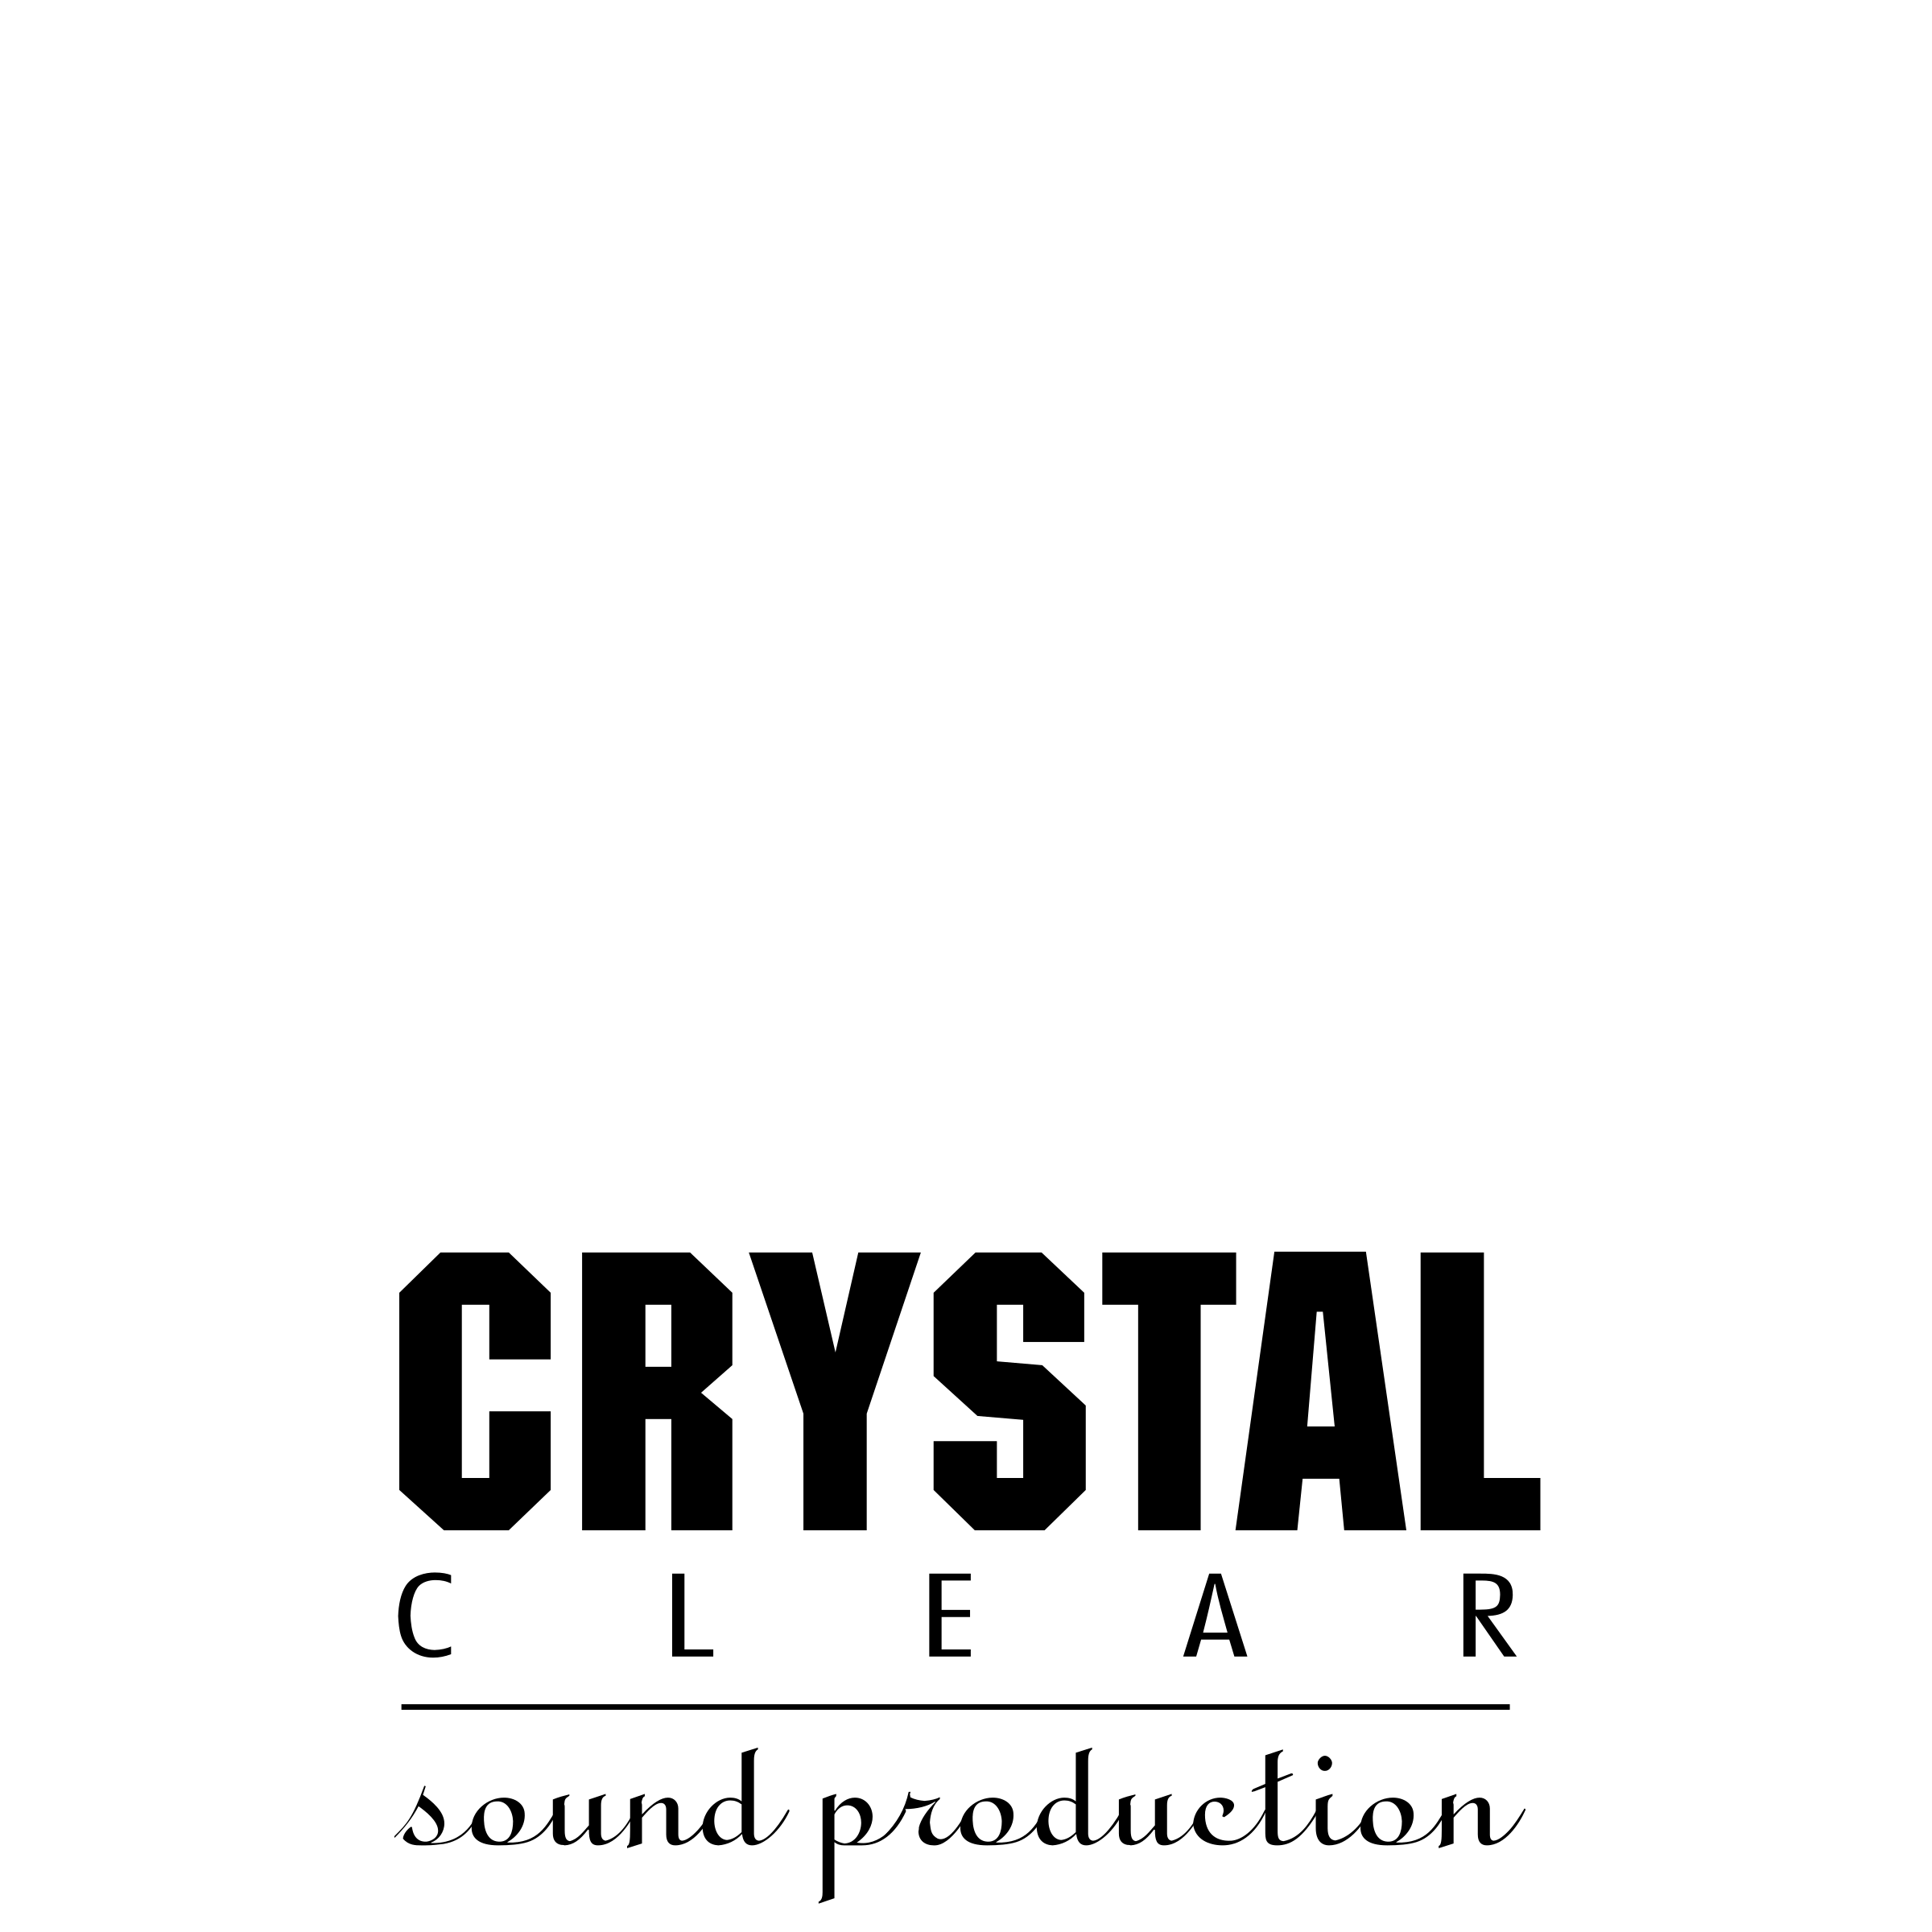 Crystal Clear Logo - Crystal Clear Logo PNG Transparent & SVG Vector - Freebie Supply